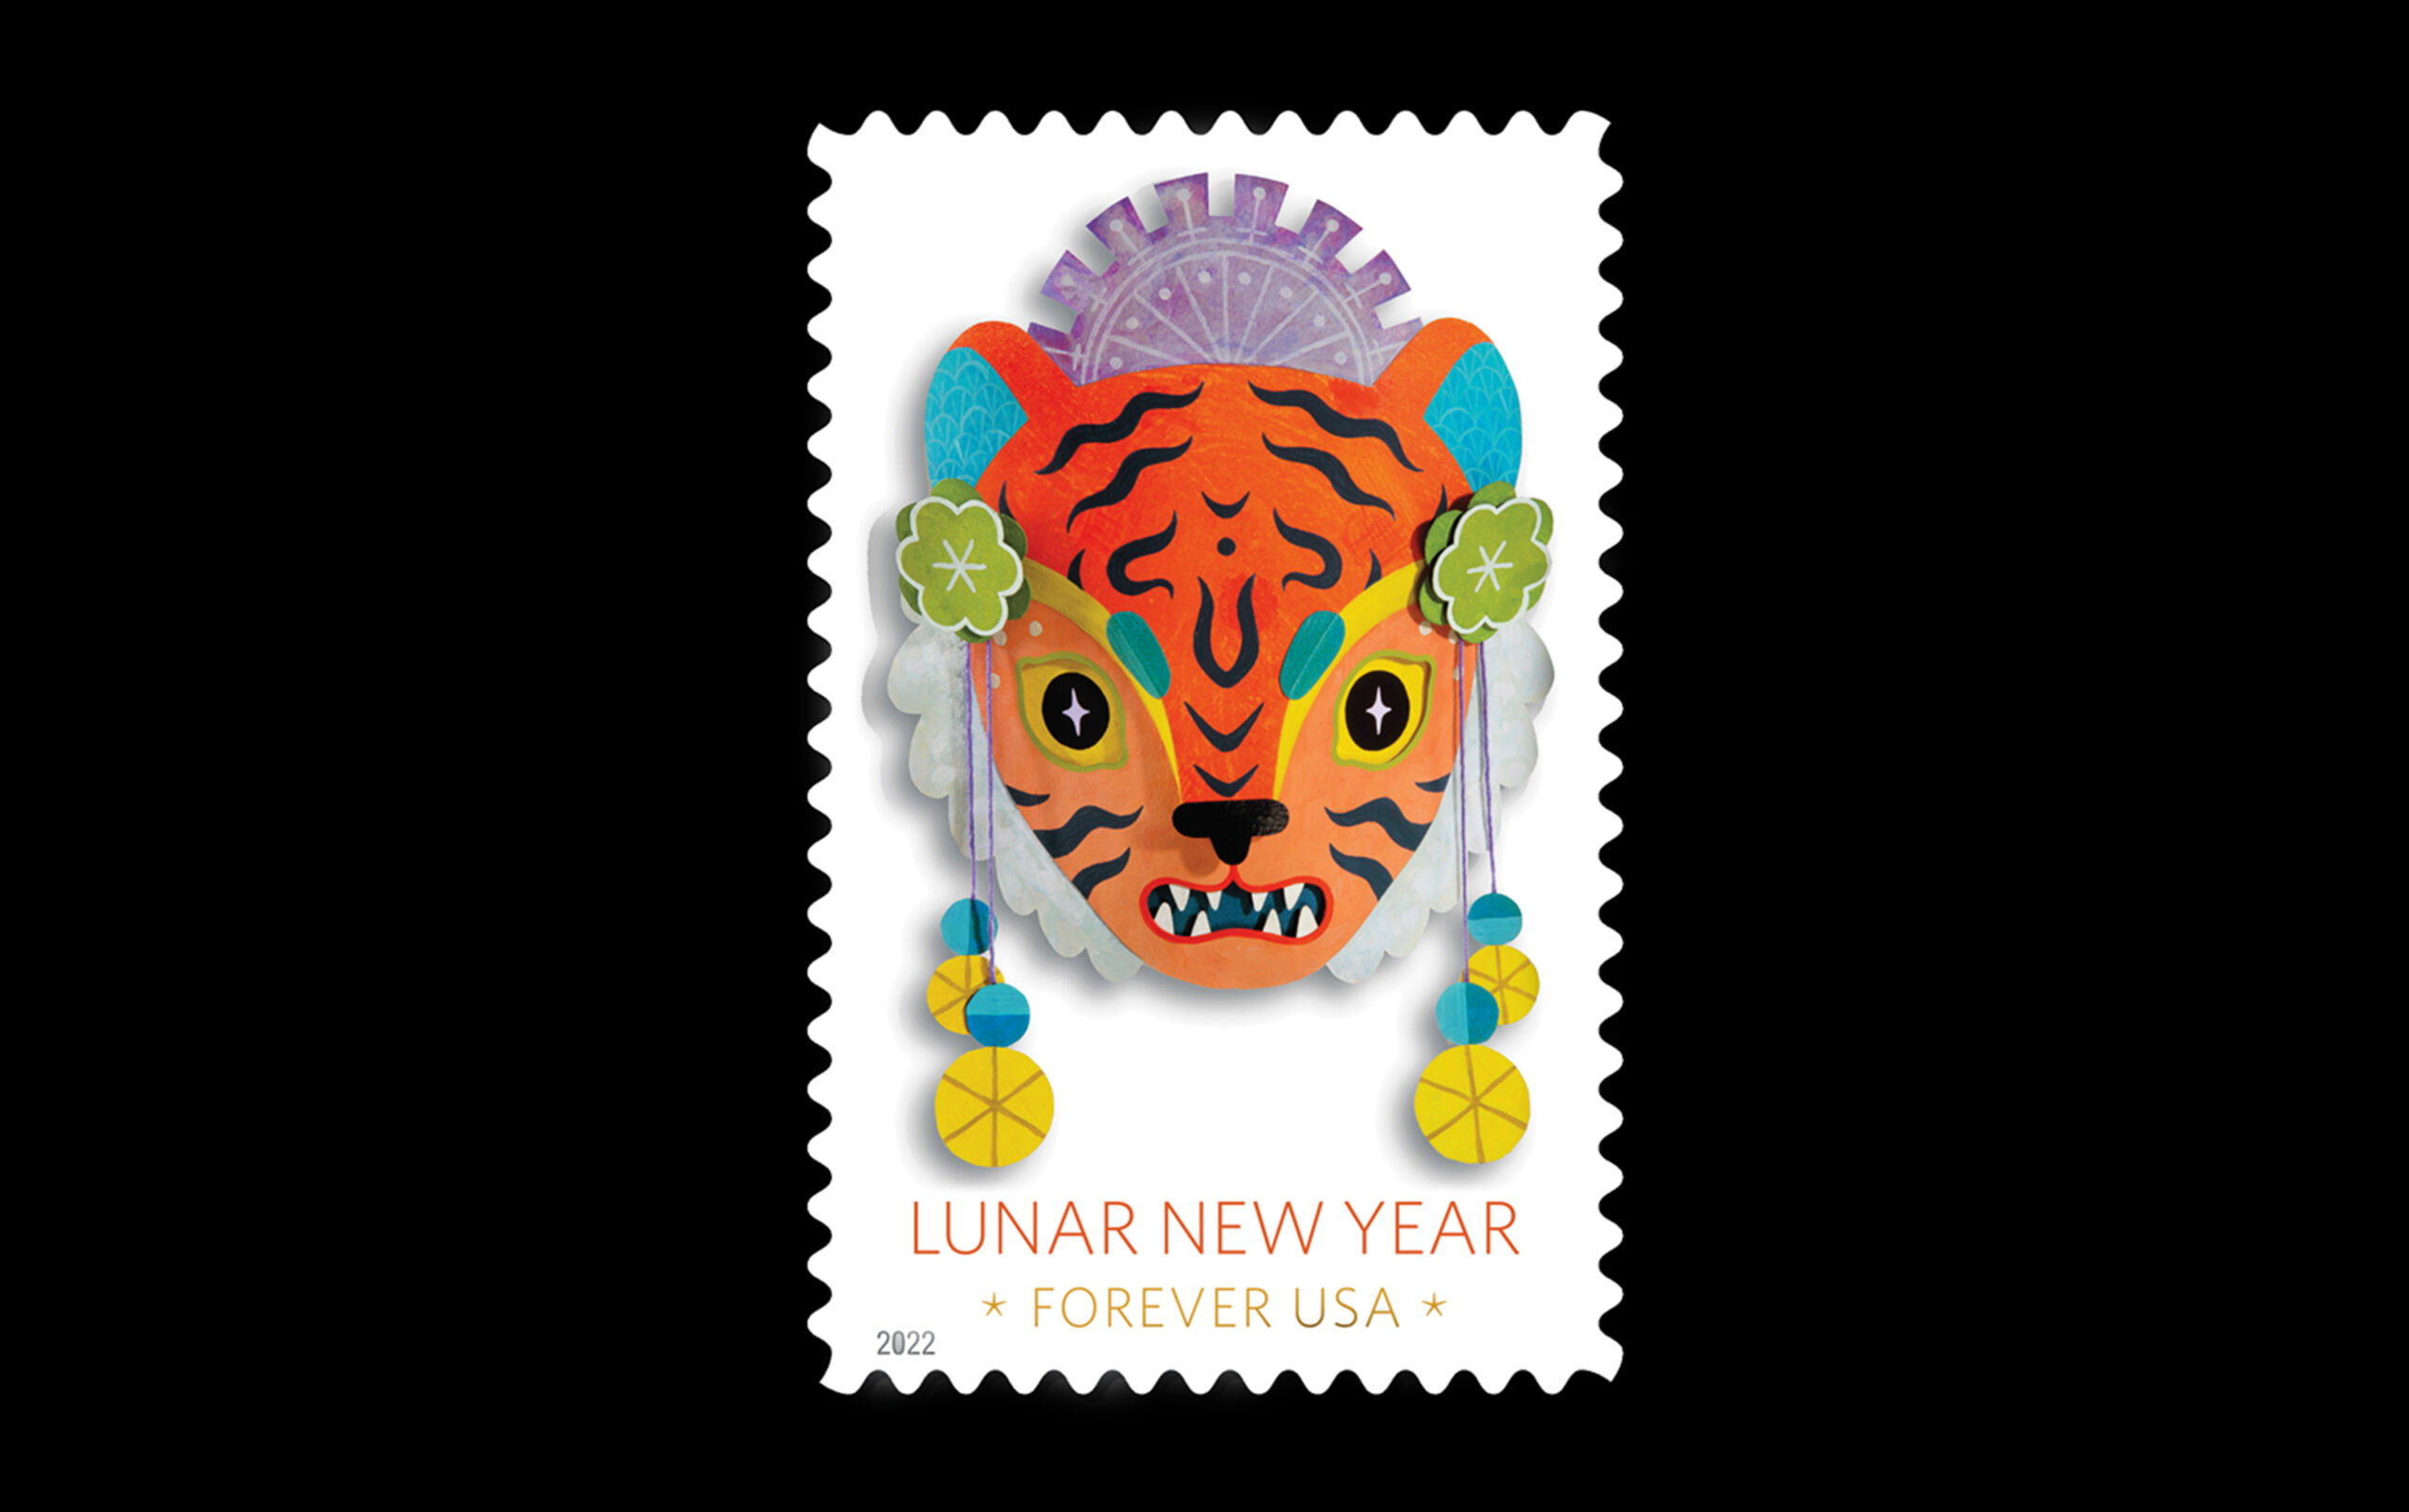 Lunar New Year Tiger Stamp by Camille Chew by Camille Chew